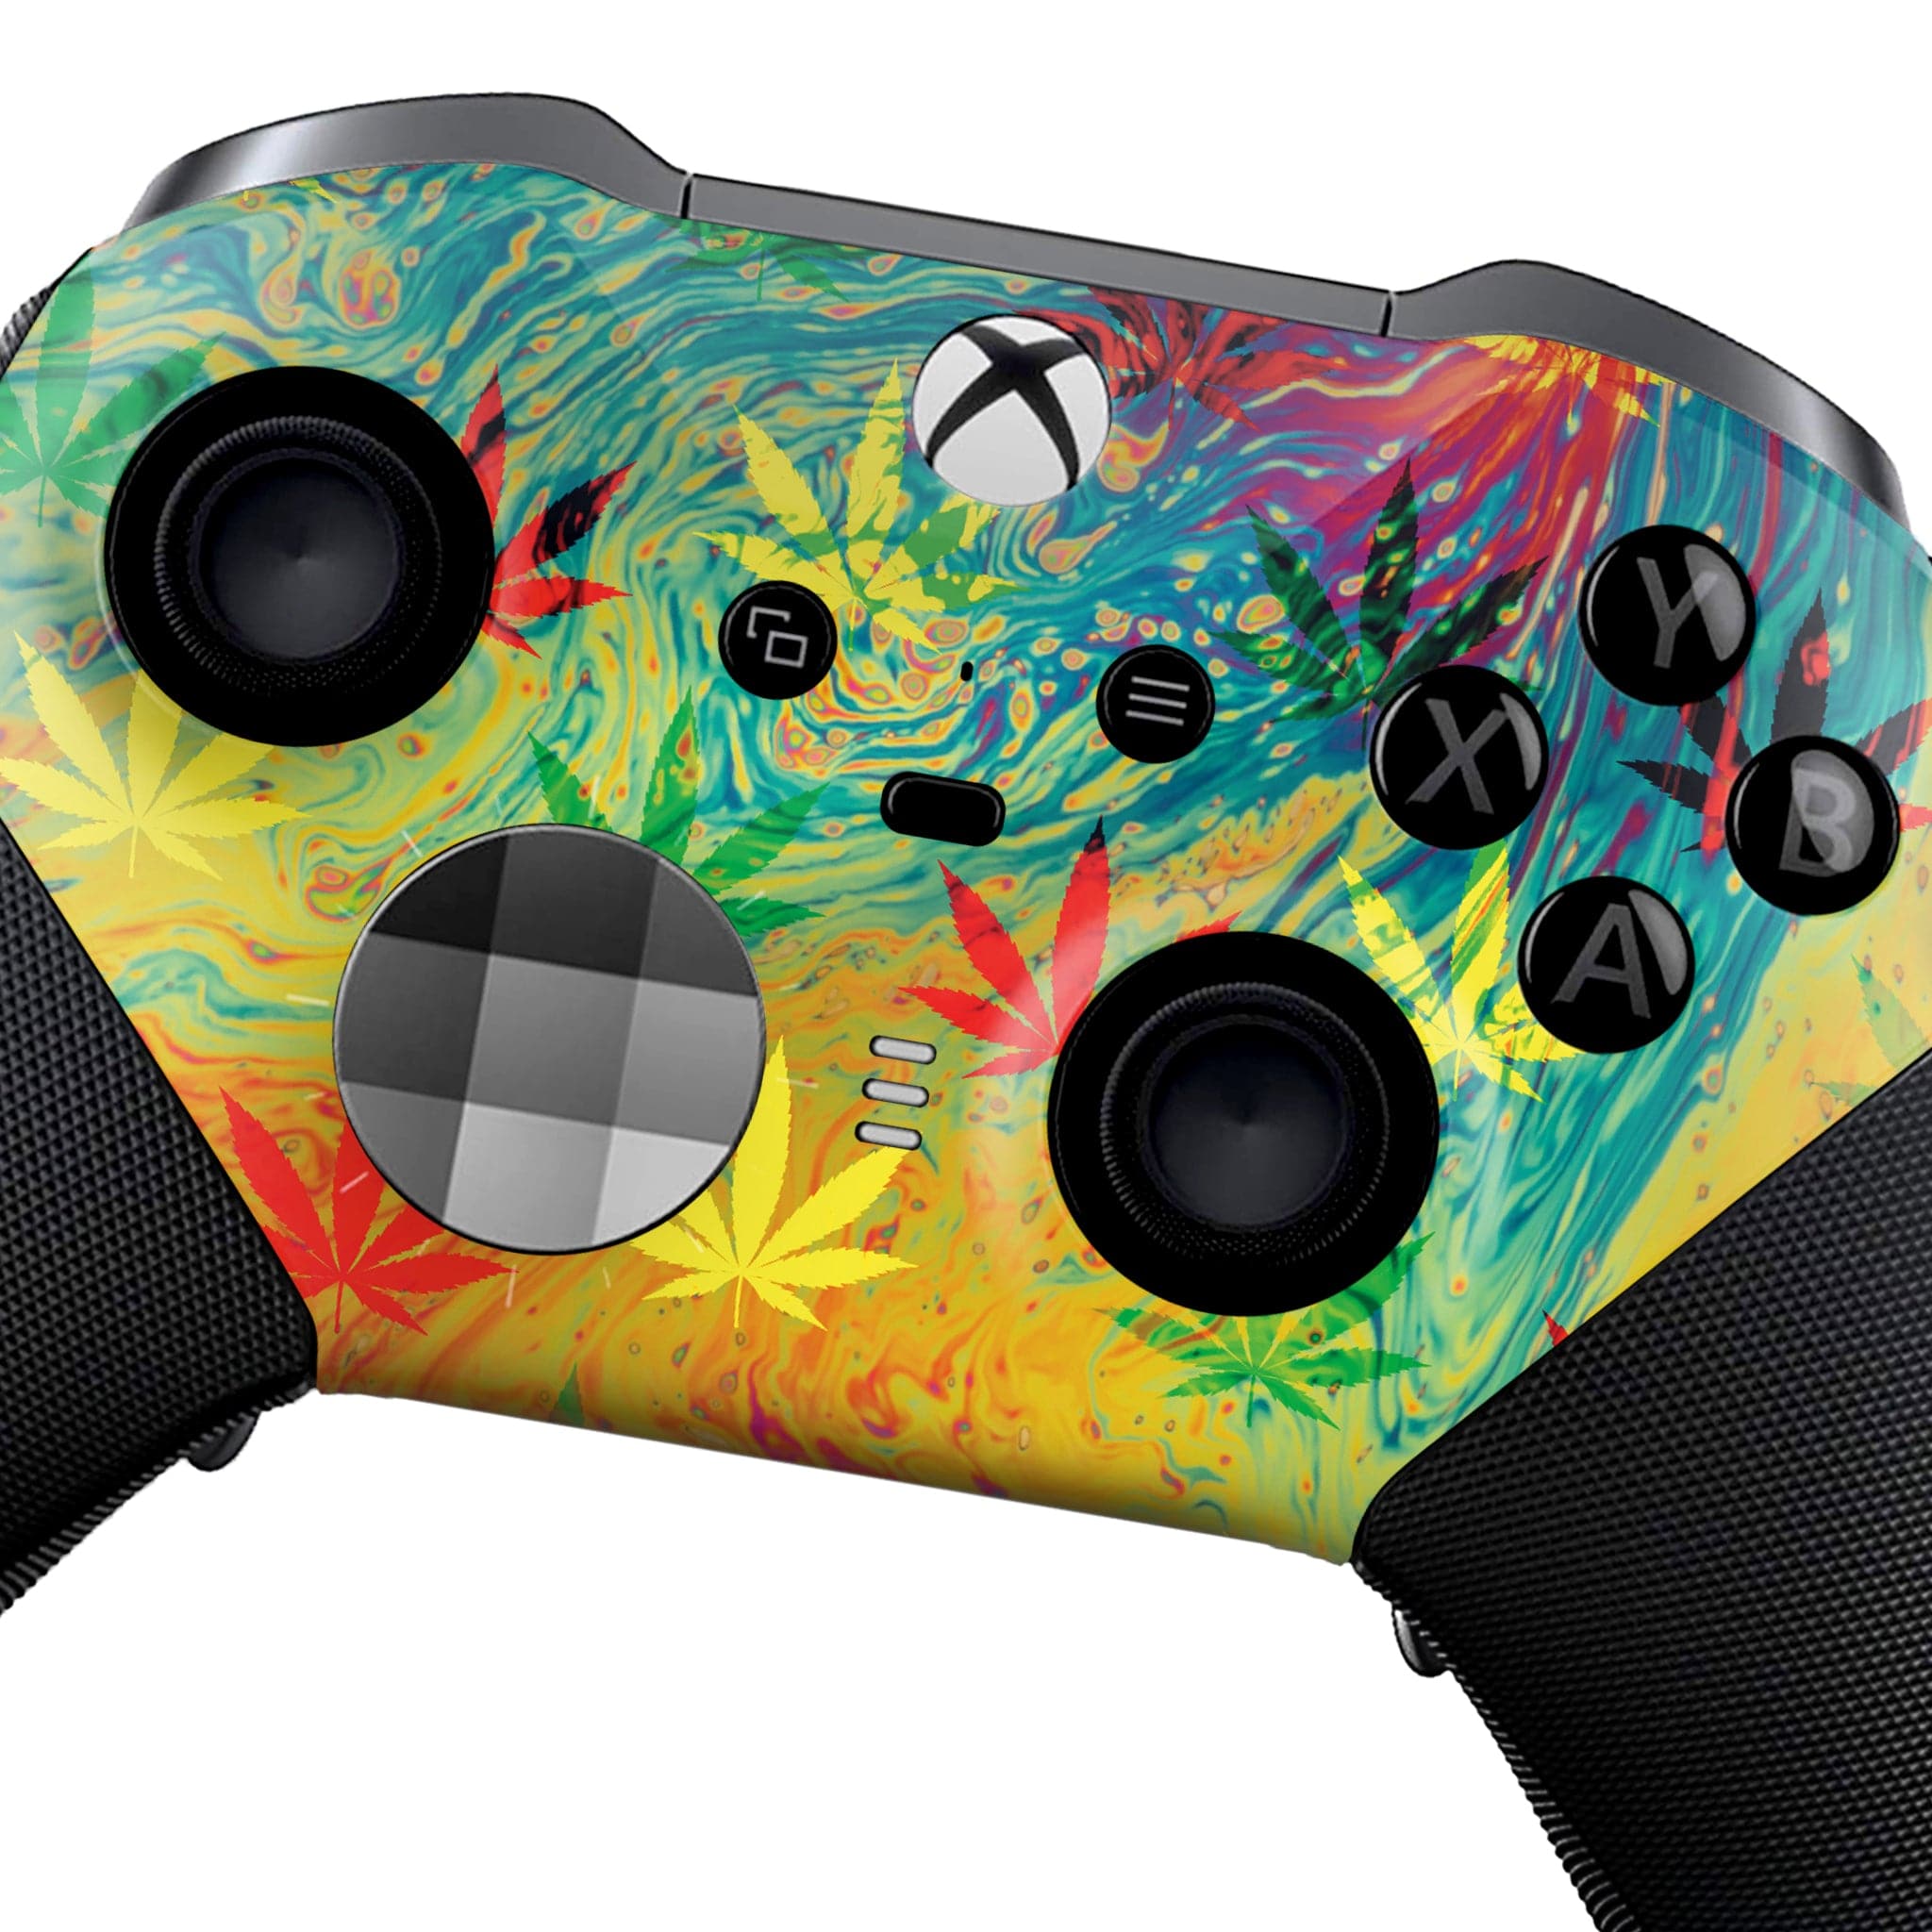 Shop Neon Weed Inspired X box Series X Controller